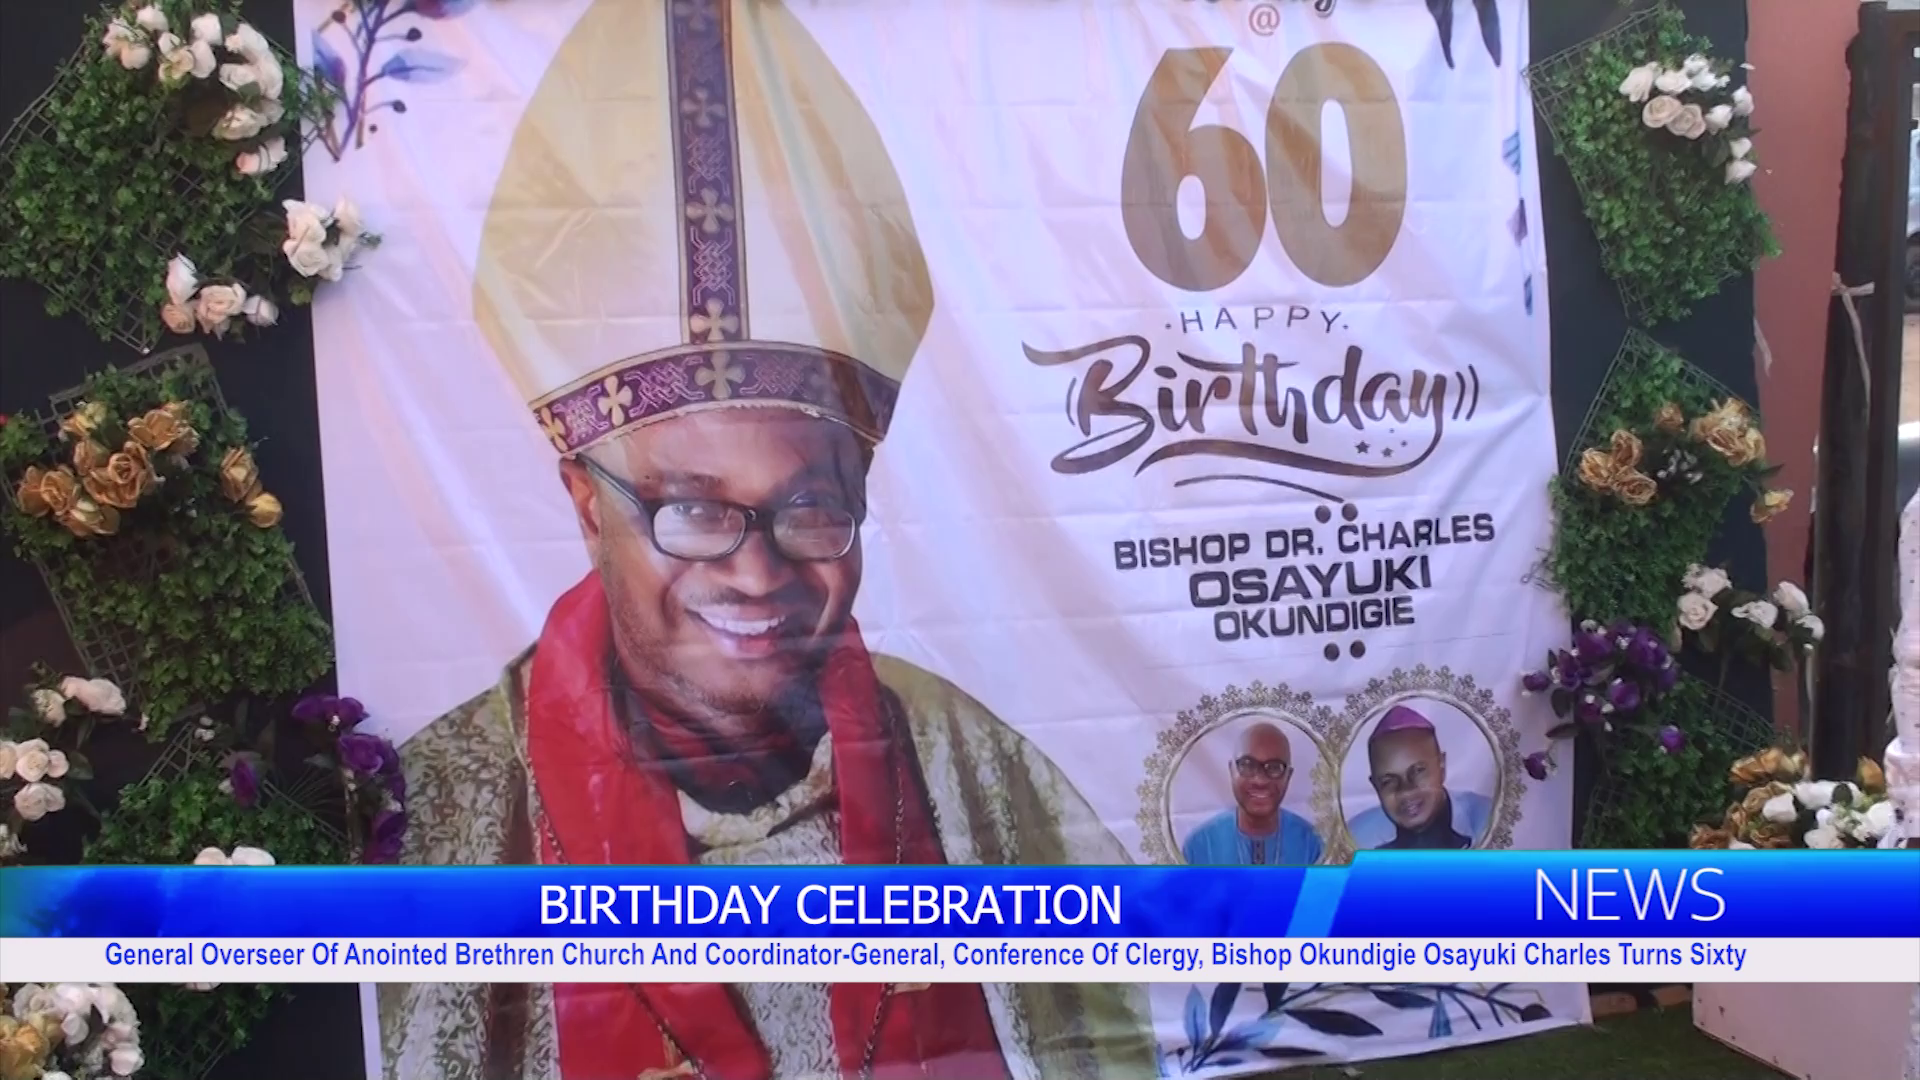 General Overseer Of Anointed Brethren Church And Coordinator-General, Conference Of Clergy, Bishop Okundigie Osayuki Charles Turns Sixty